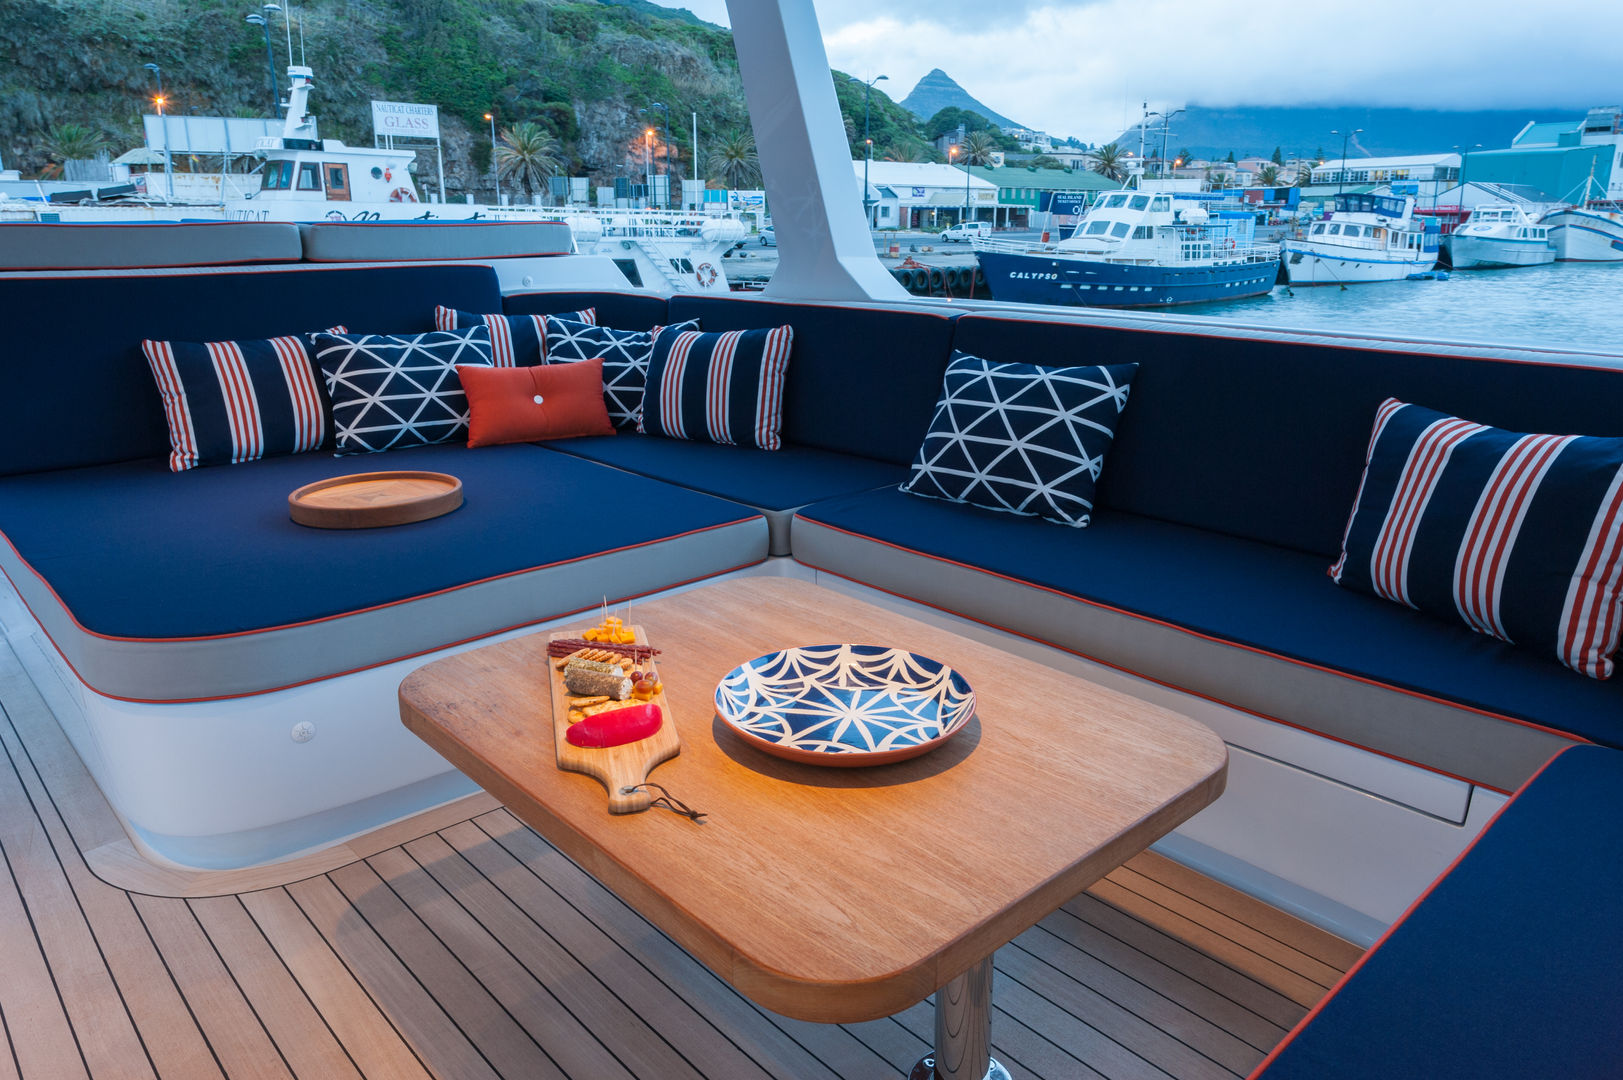 Upper deck chill out area ONNAH DESIGN Yachts & jets